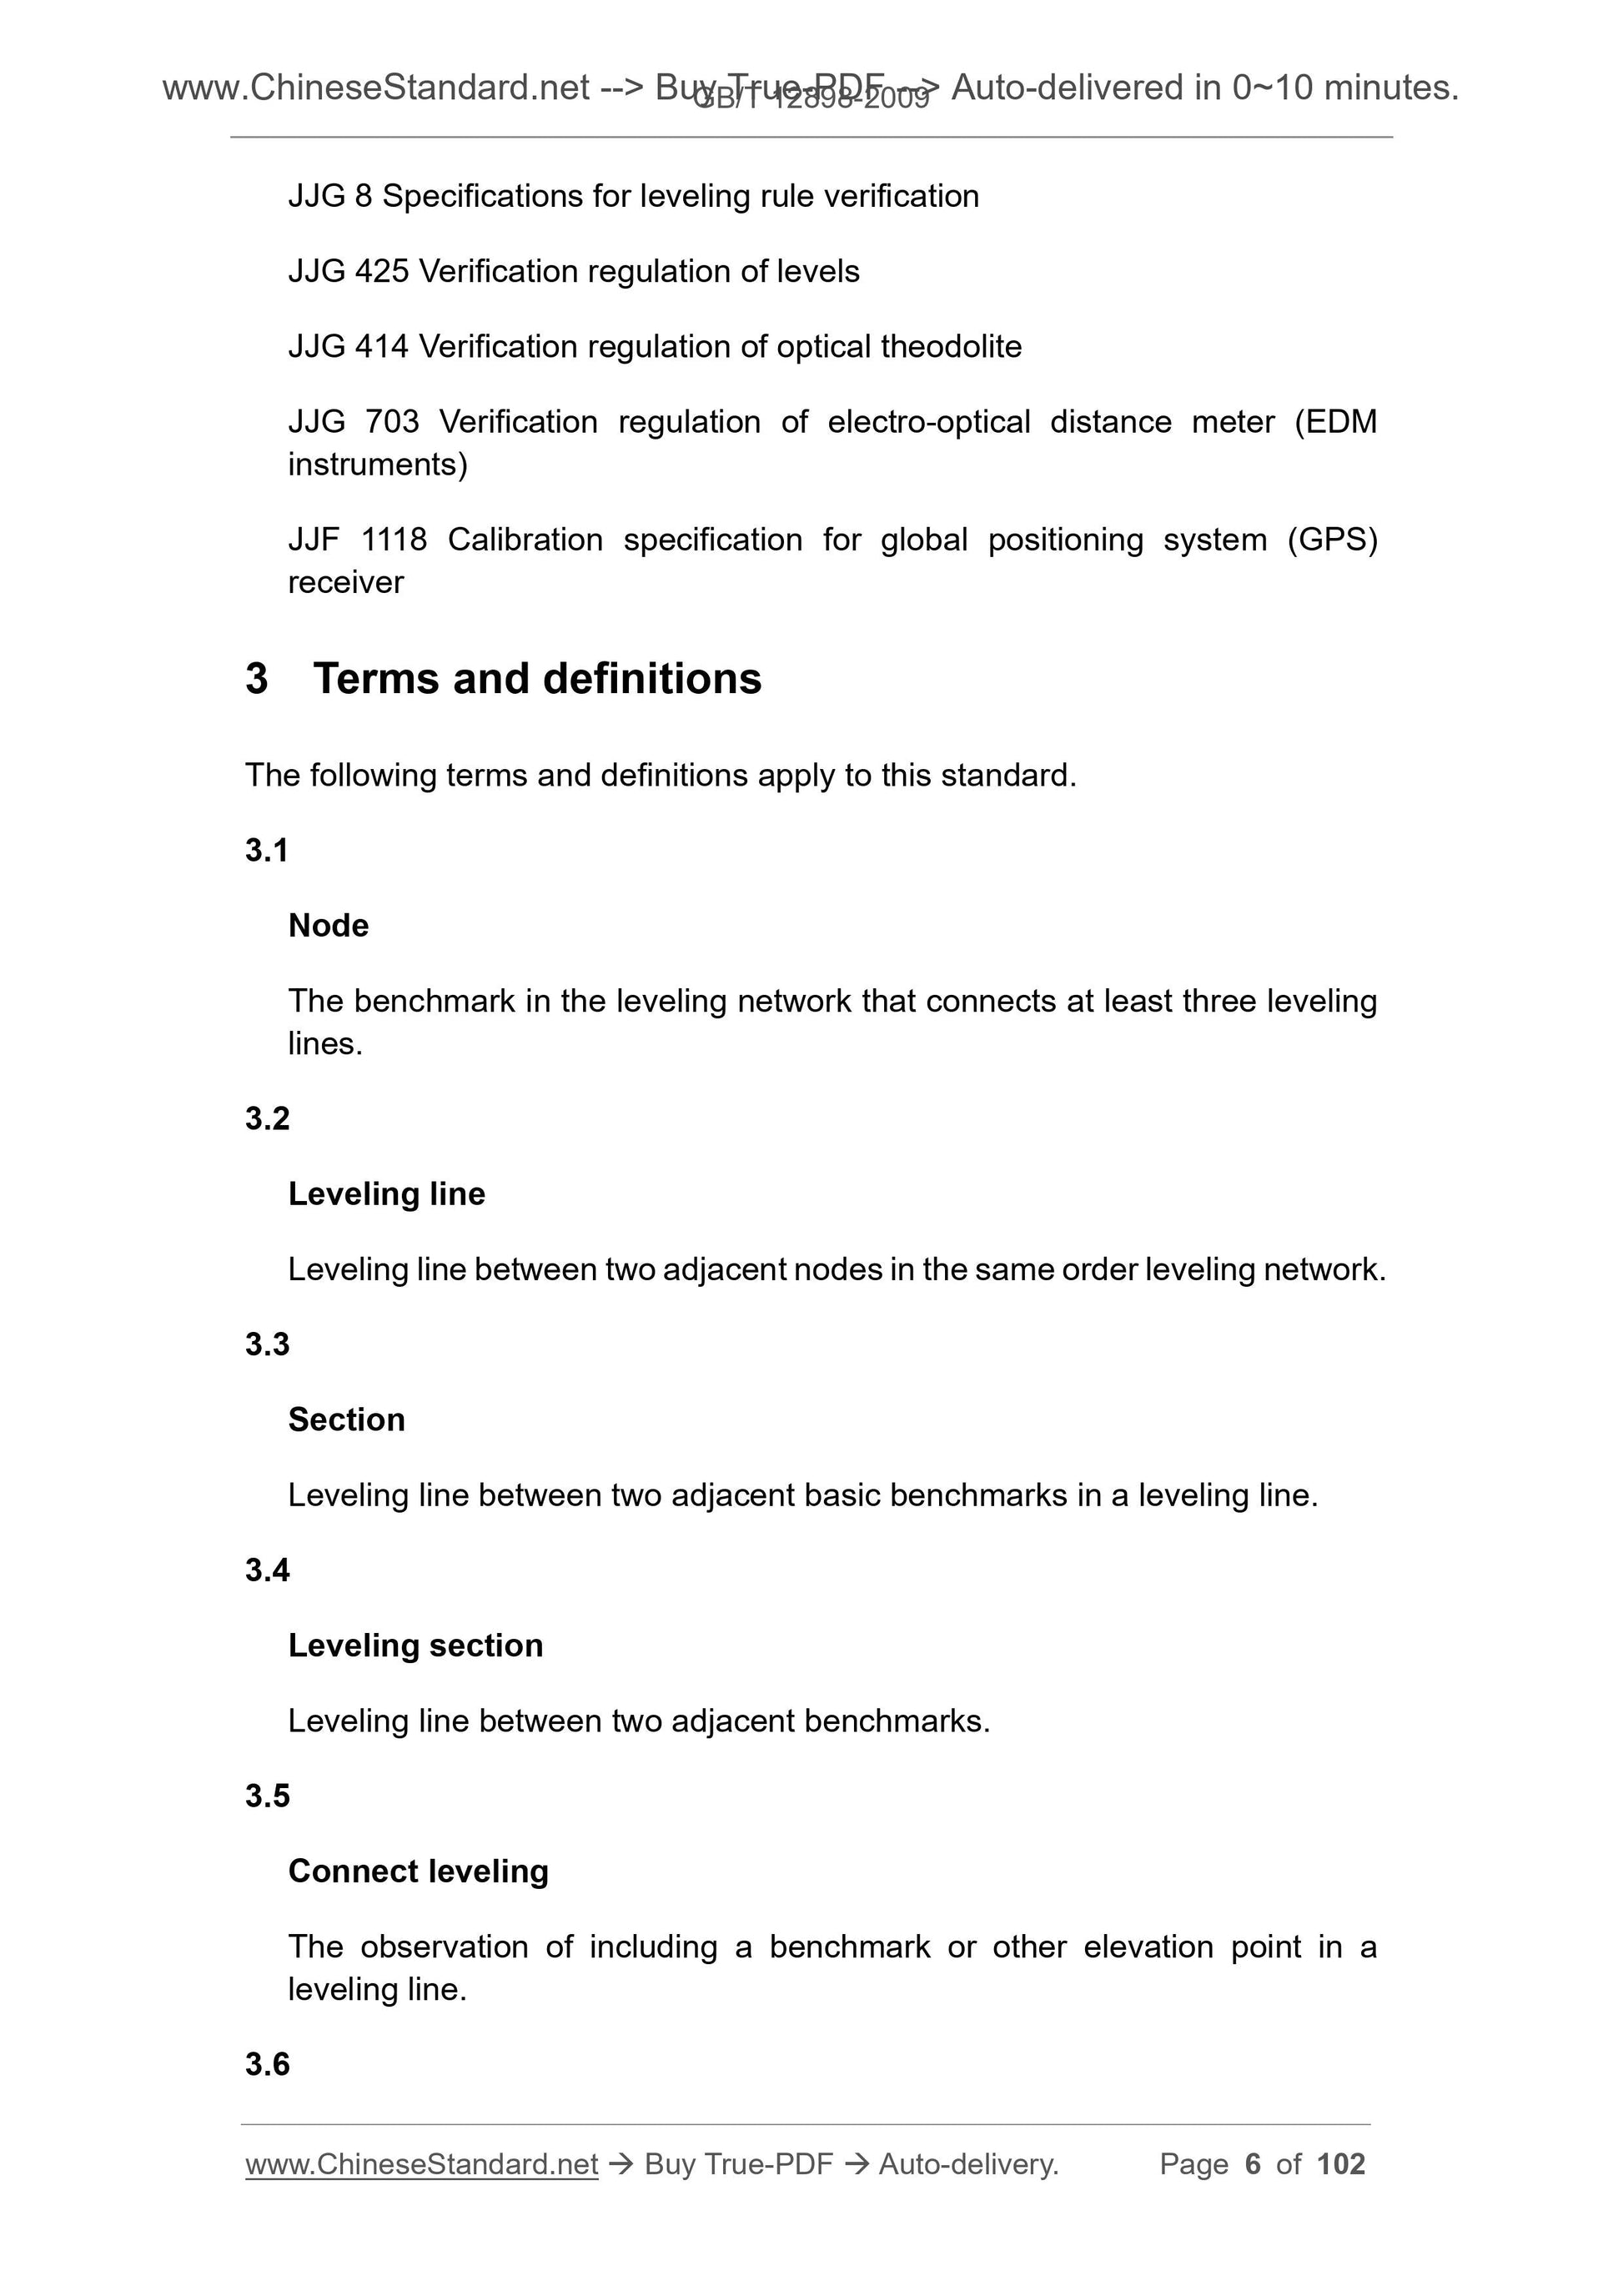 GB/T 12898-2009 Page 5